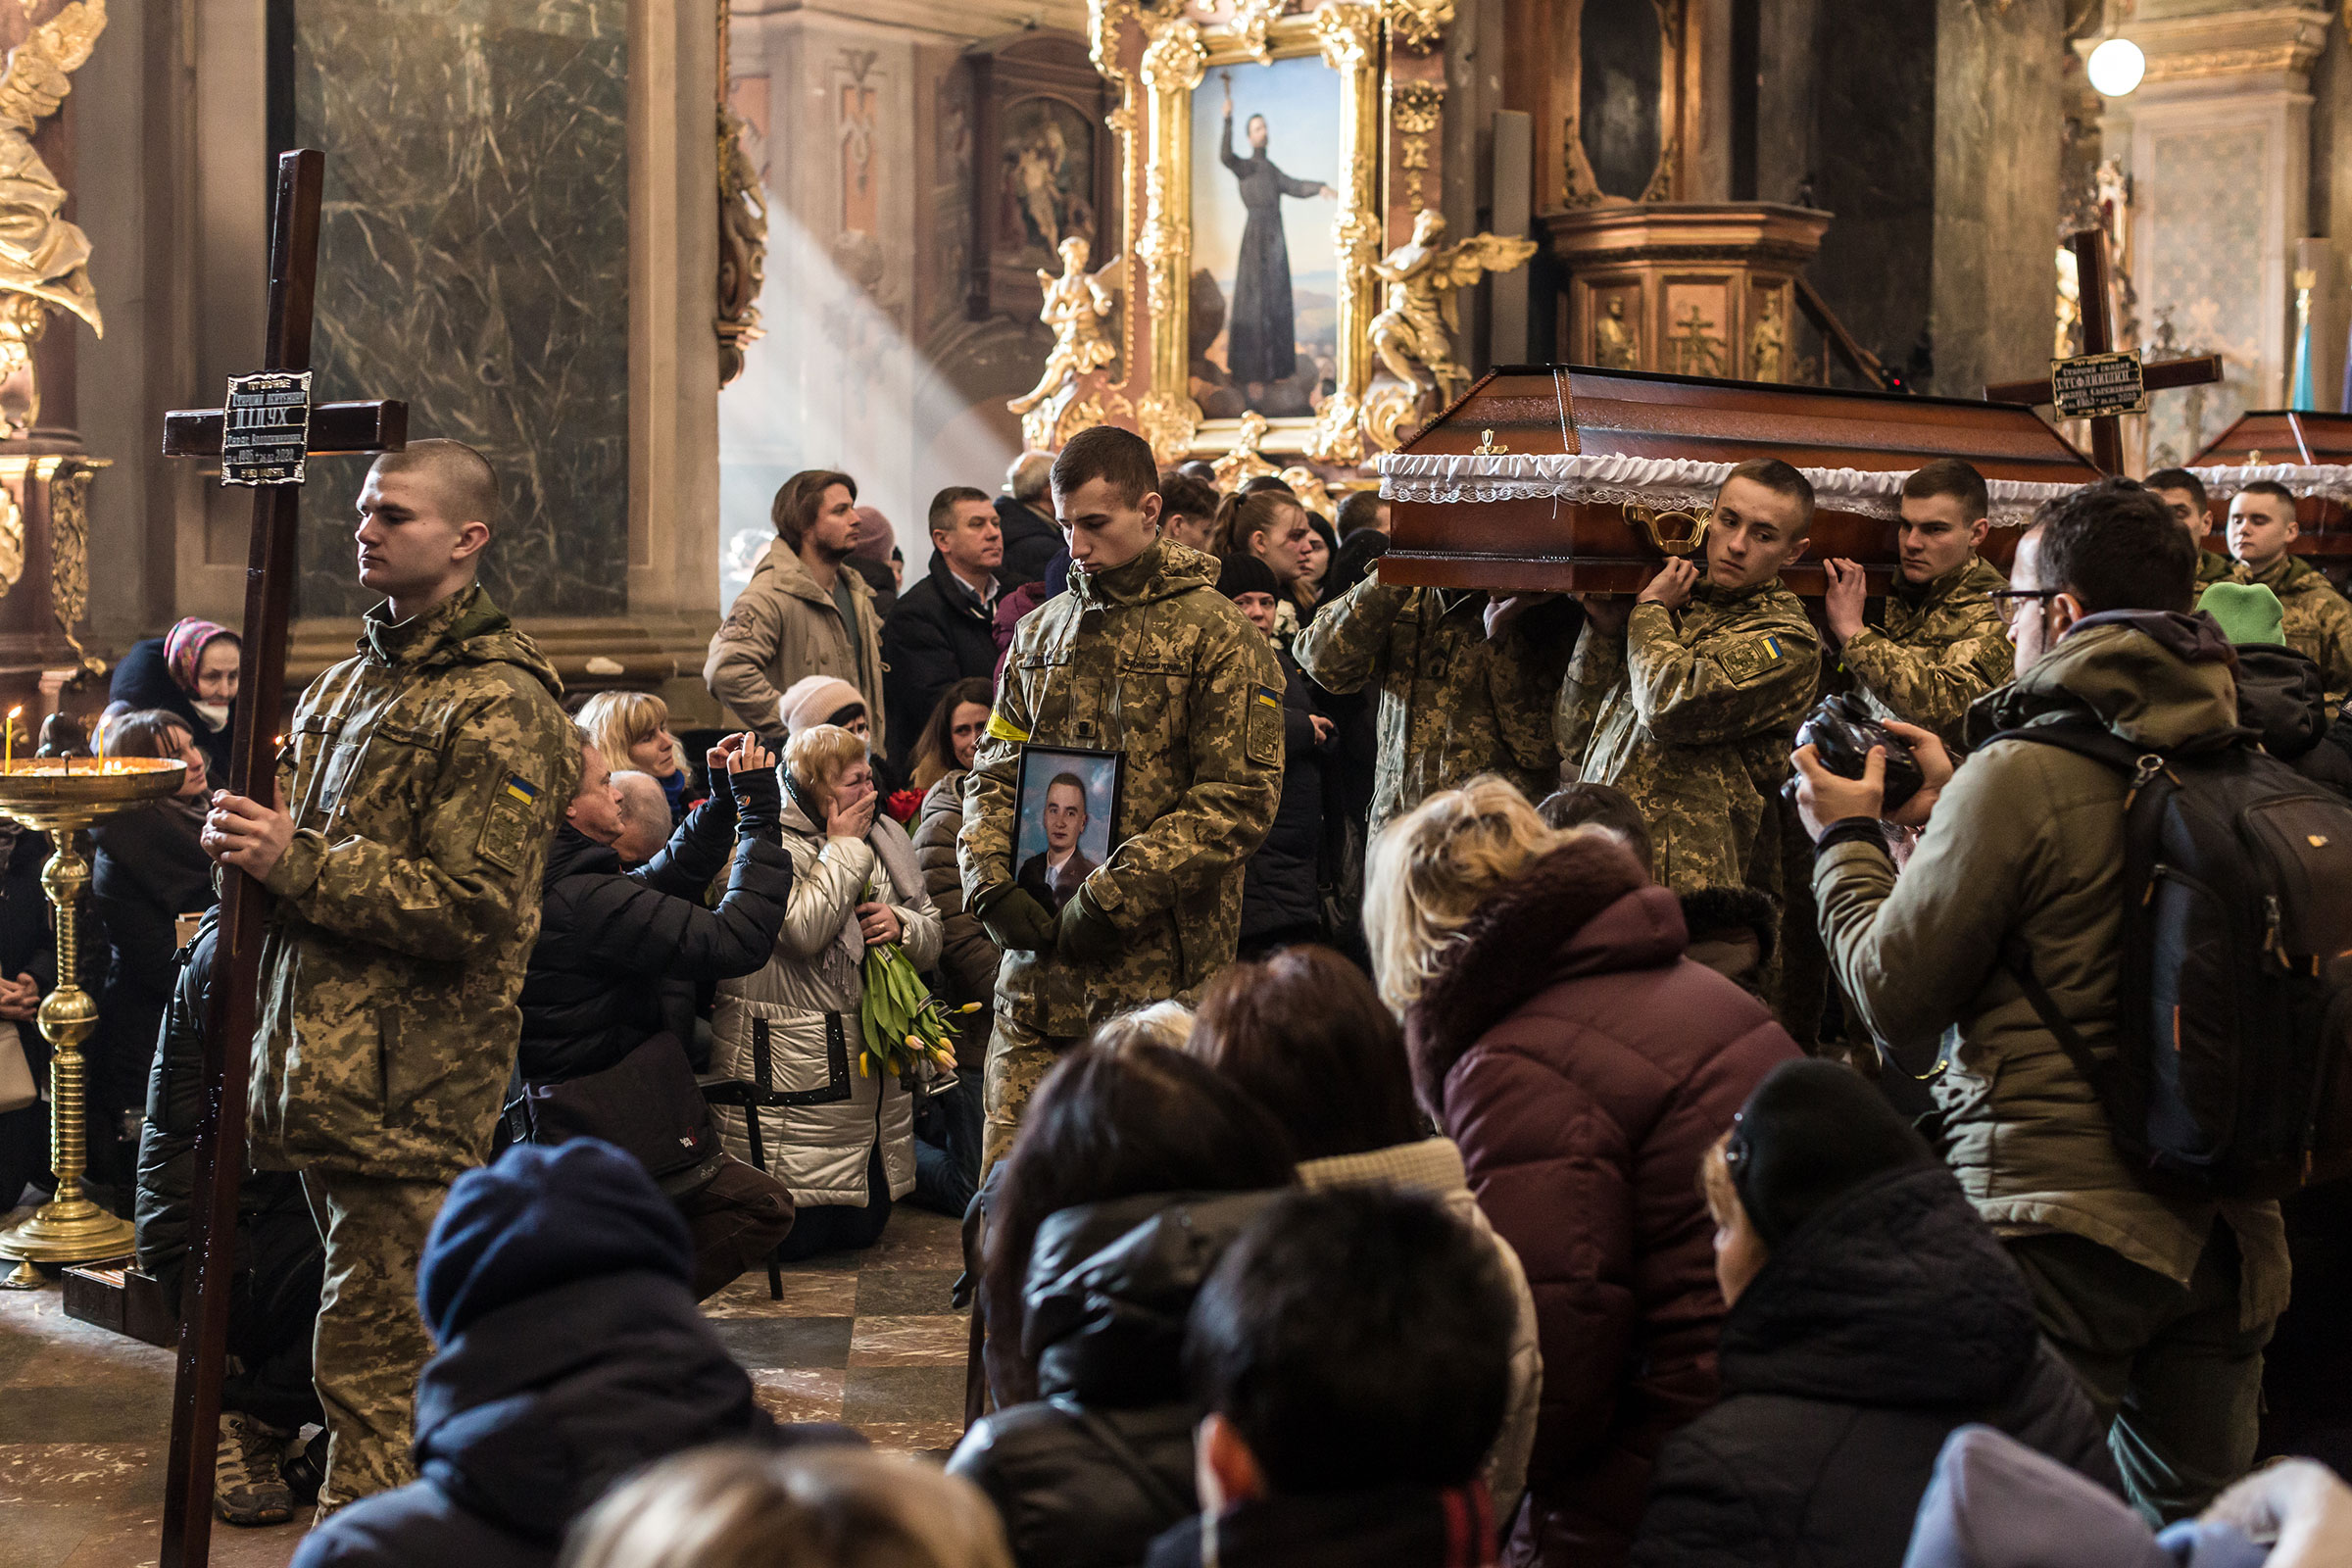 Fellow soldiers carry in the coffin of Taras Diduh, who was killed on Feb. 26 in the war, during a funeral ceremony held at the Church of the Most Holy Apostles Peter and Paul in Lviv on March 11, 2022. (Oksana Parafeniuk)